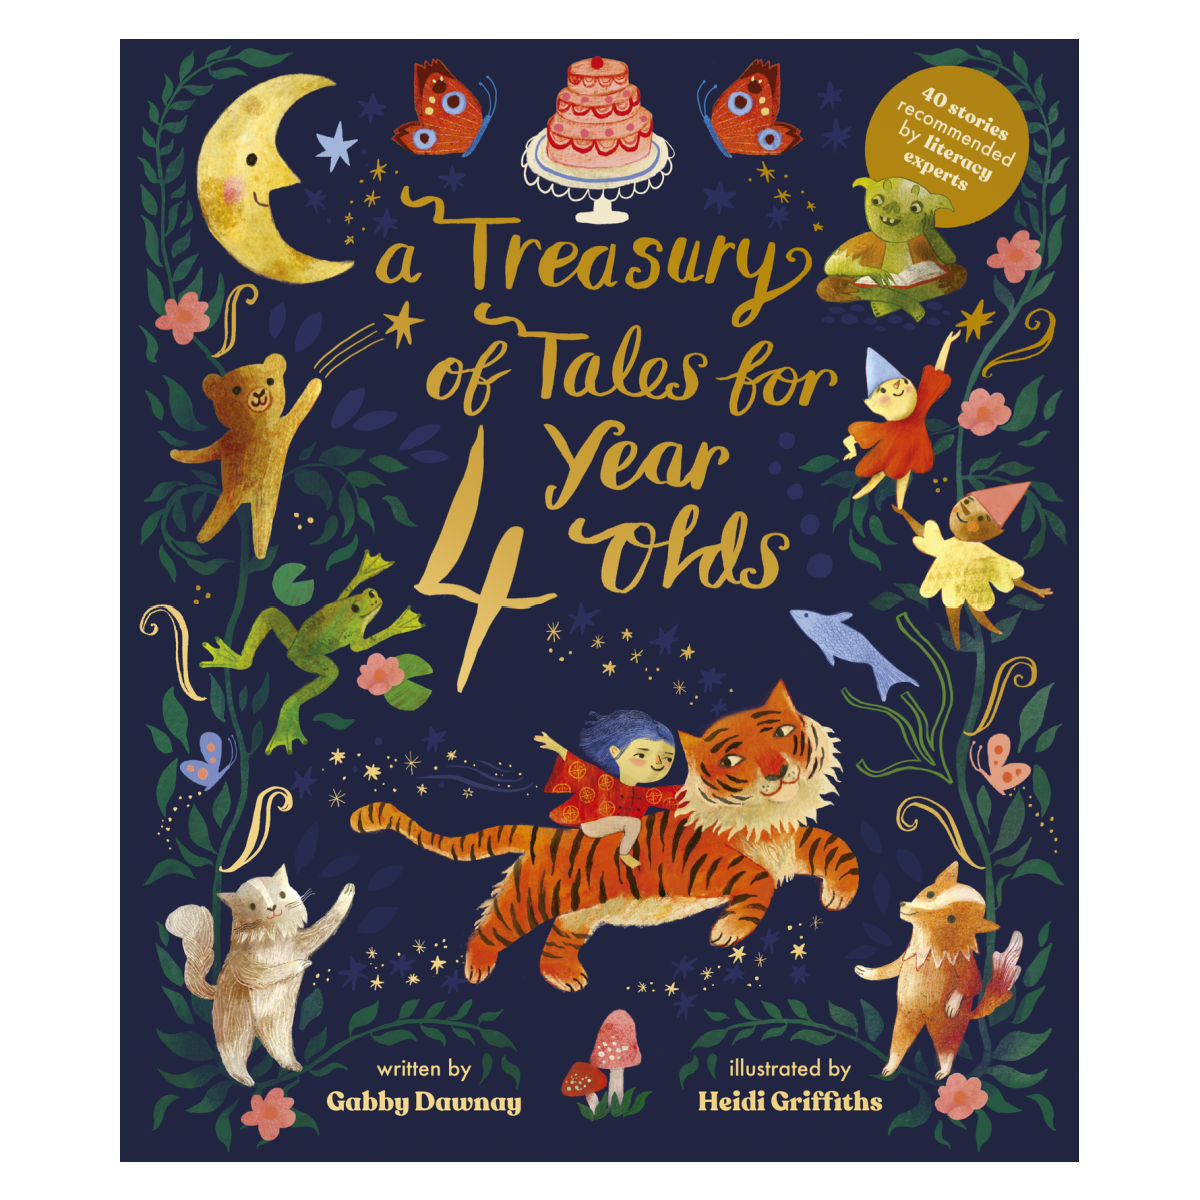 A Treasury of Tales for Four-Year-Olds